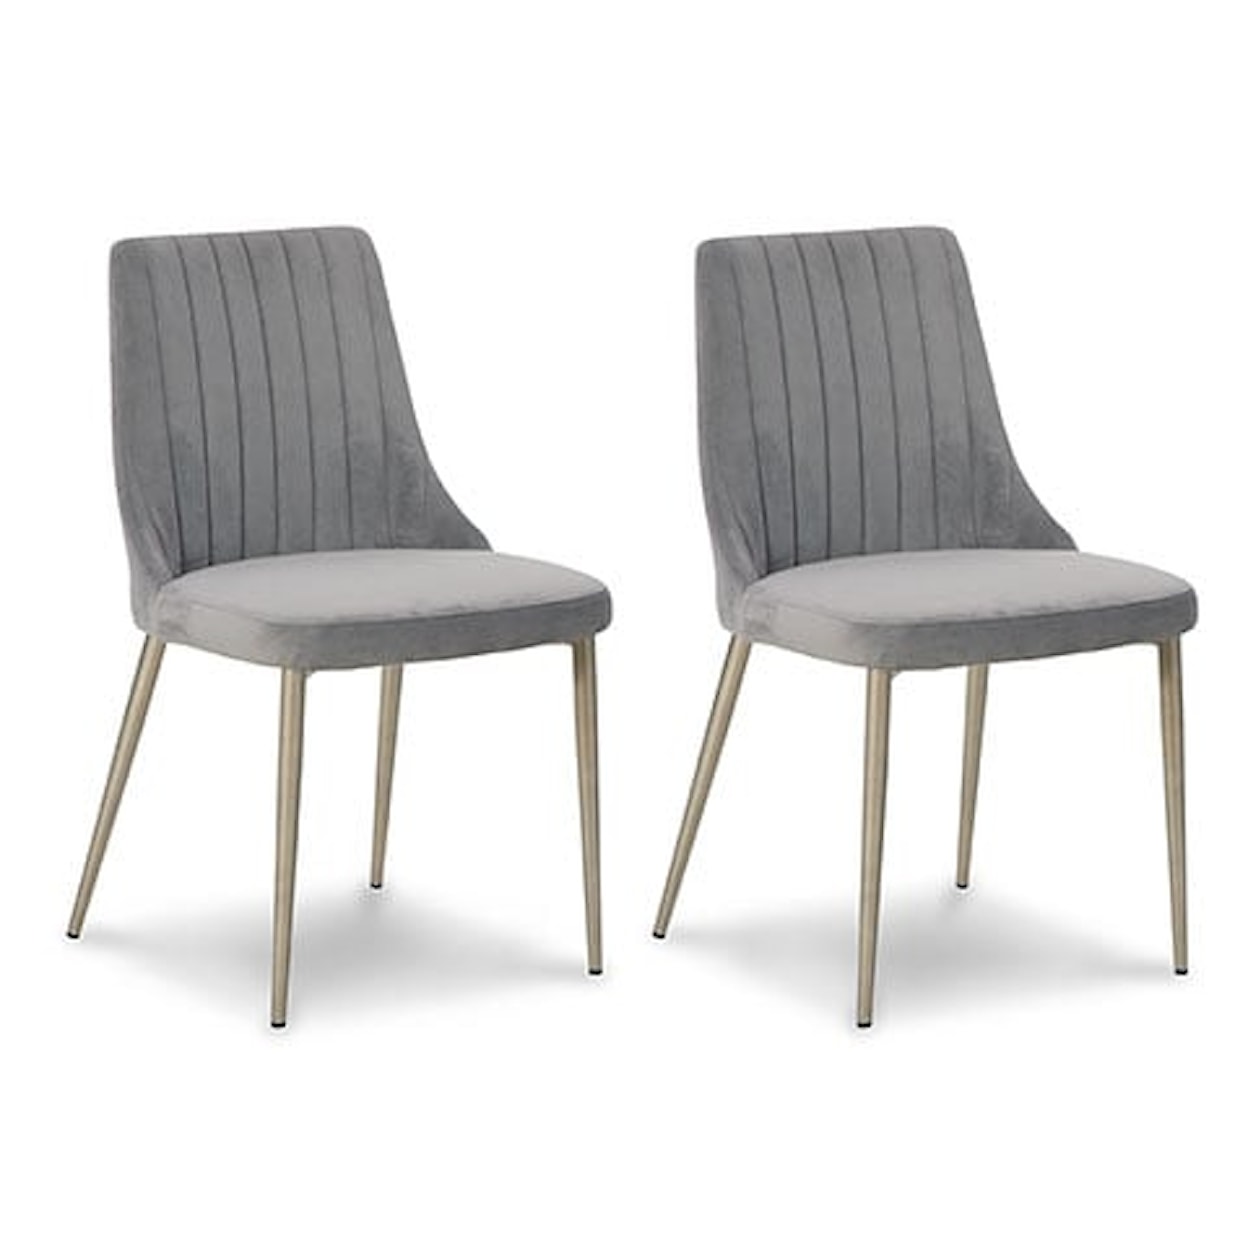 Michael Alan Select Barchoni Upholstered Dining Side Chair